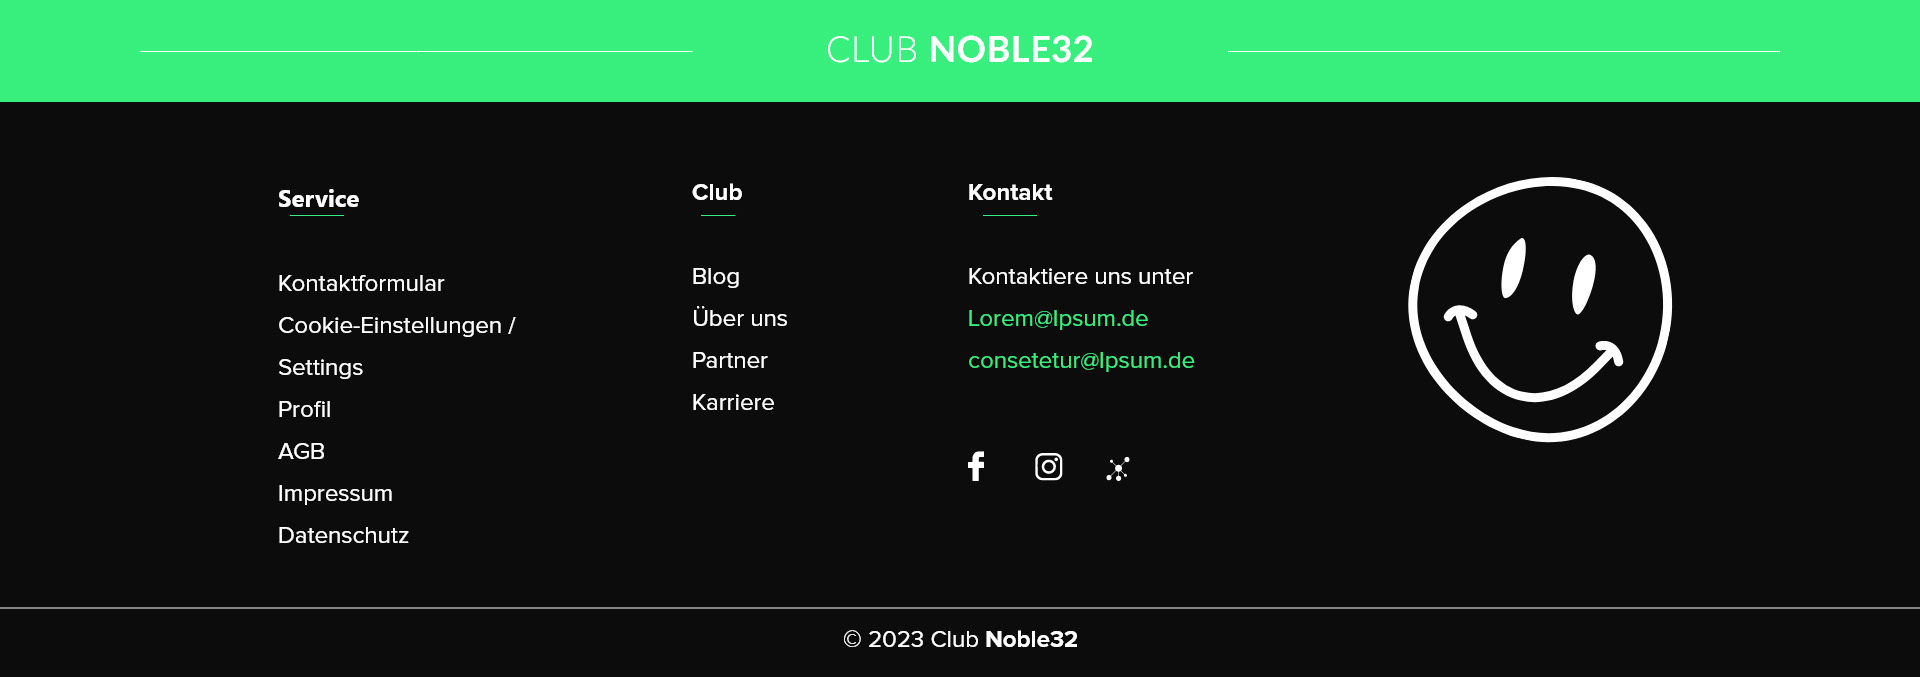 Footer der Webseite Club Noble32